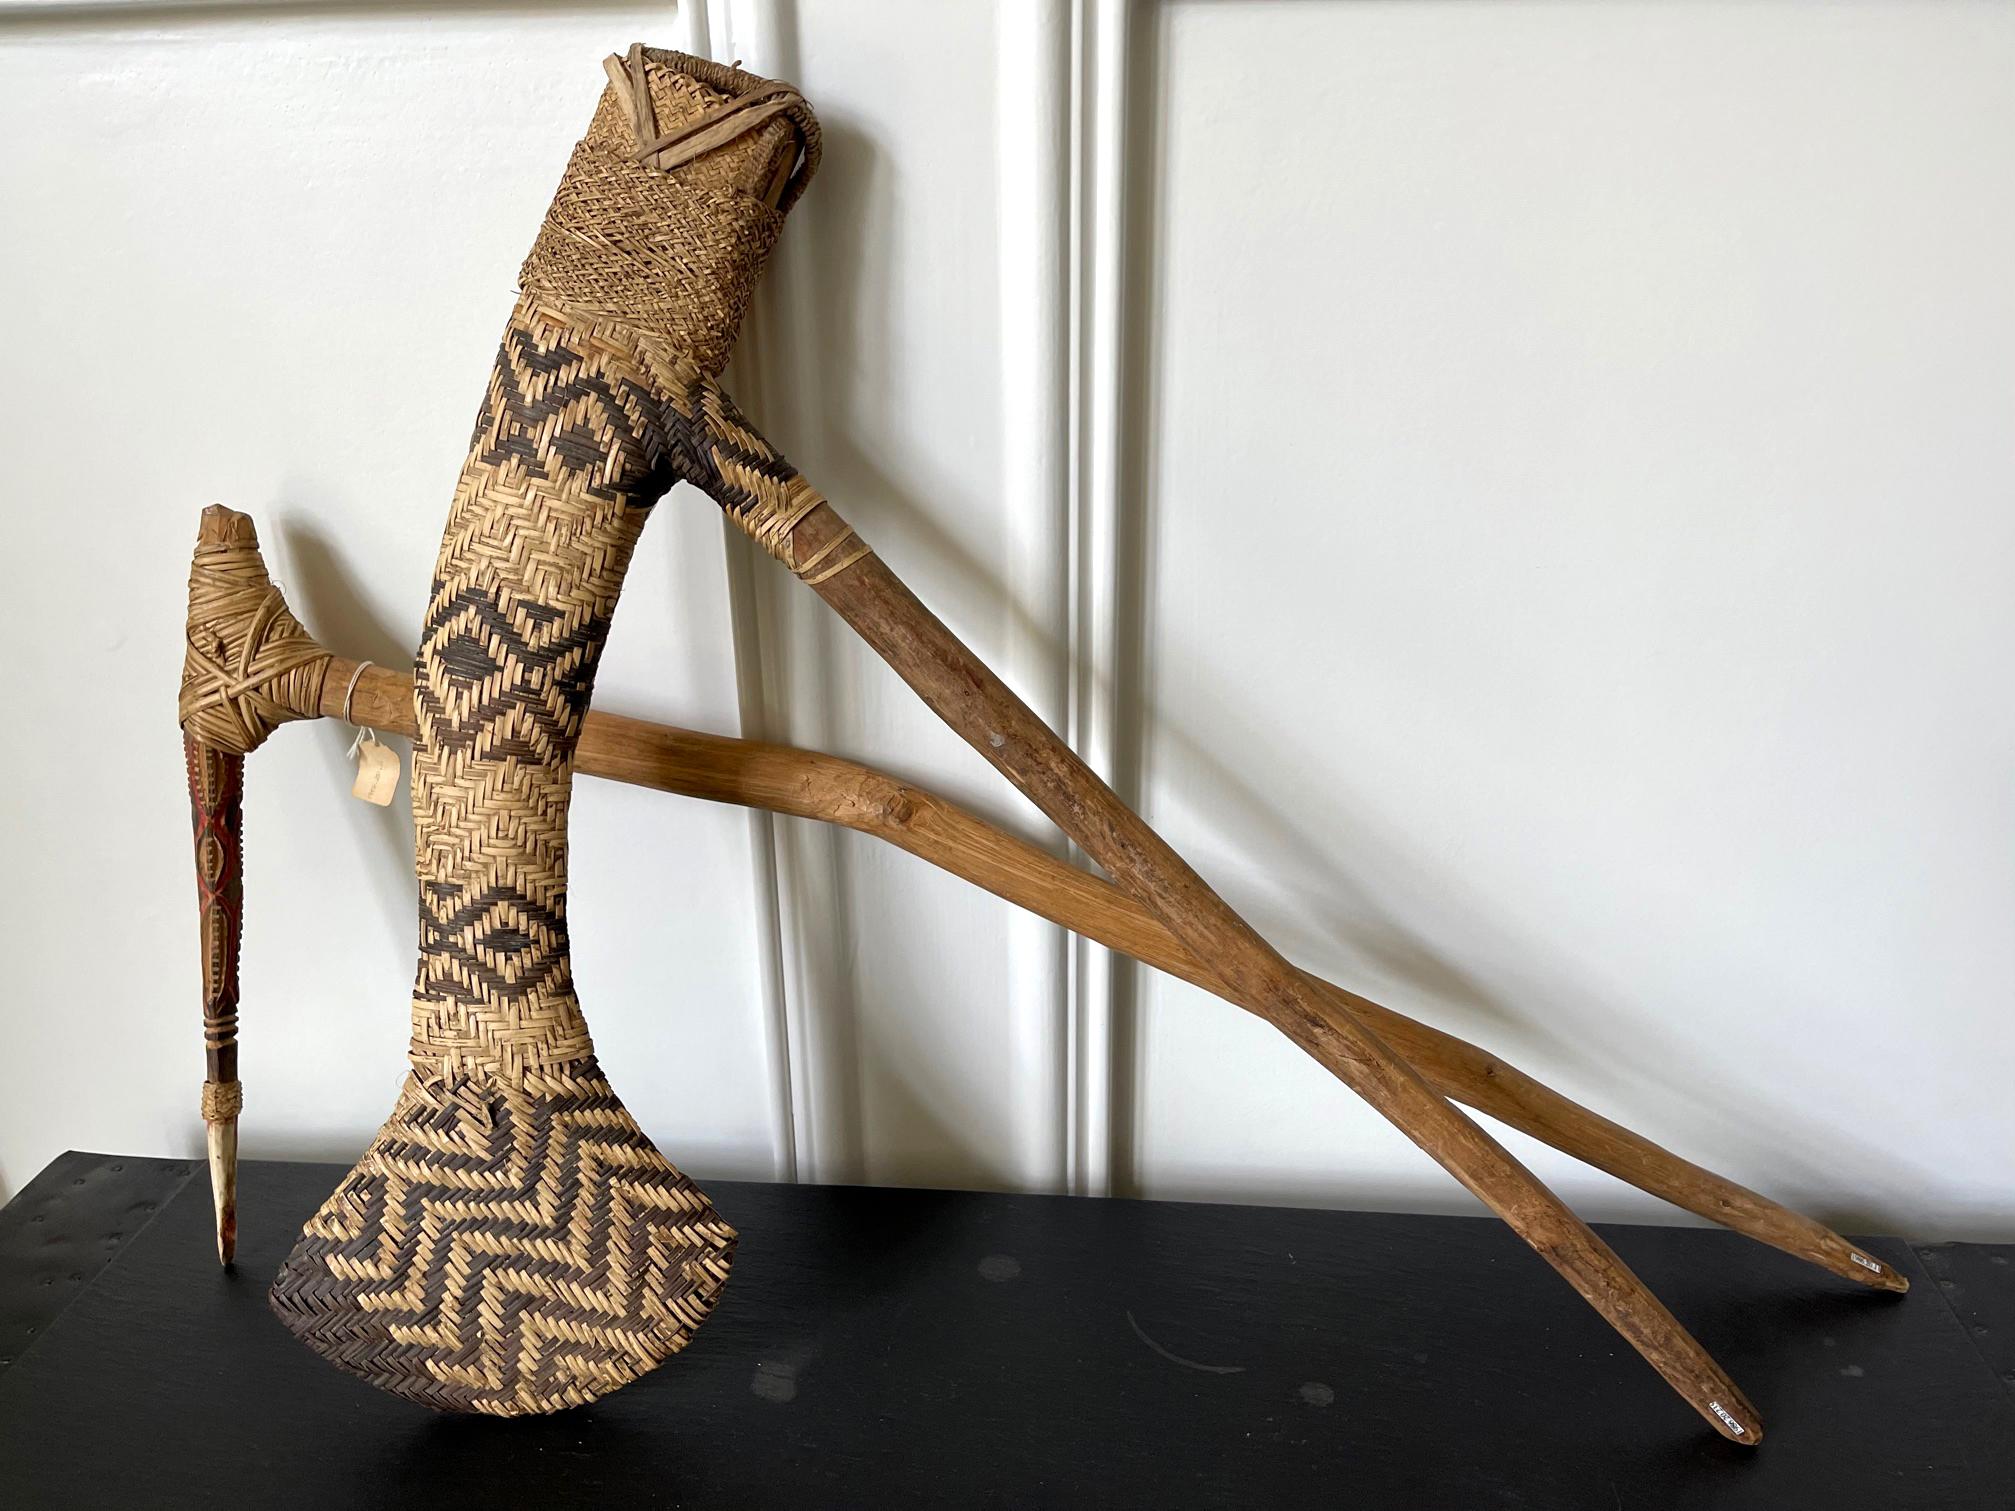 Two Oceanic ceremonial weapons from PNG highlands circa 20th century. It consists of two pieces. The first is an ax with a wood shaft and a flat elongated head wrapped in finely woven rattan sheath with geometrical patterns Size: 25 1/2''L, 20''W.